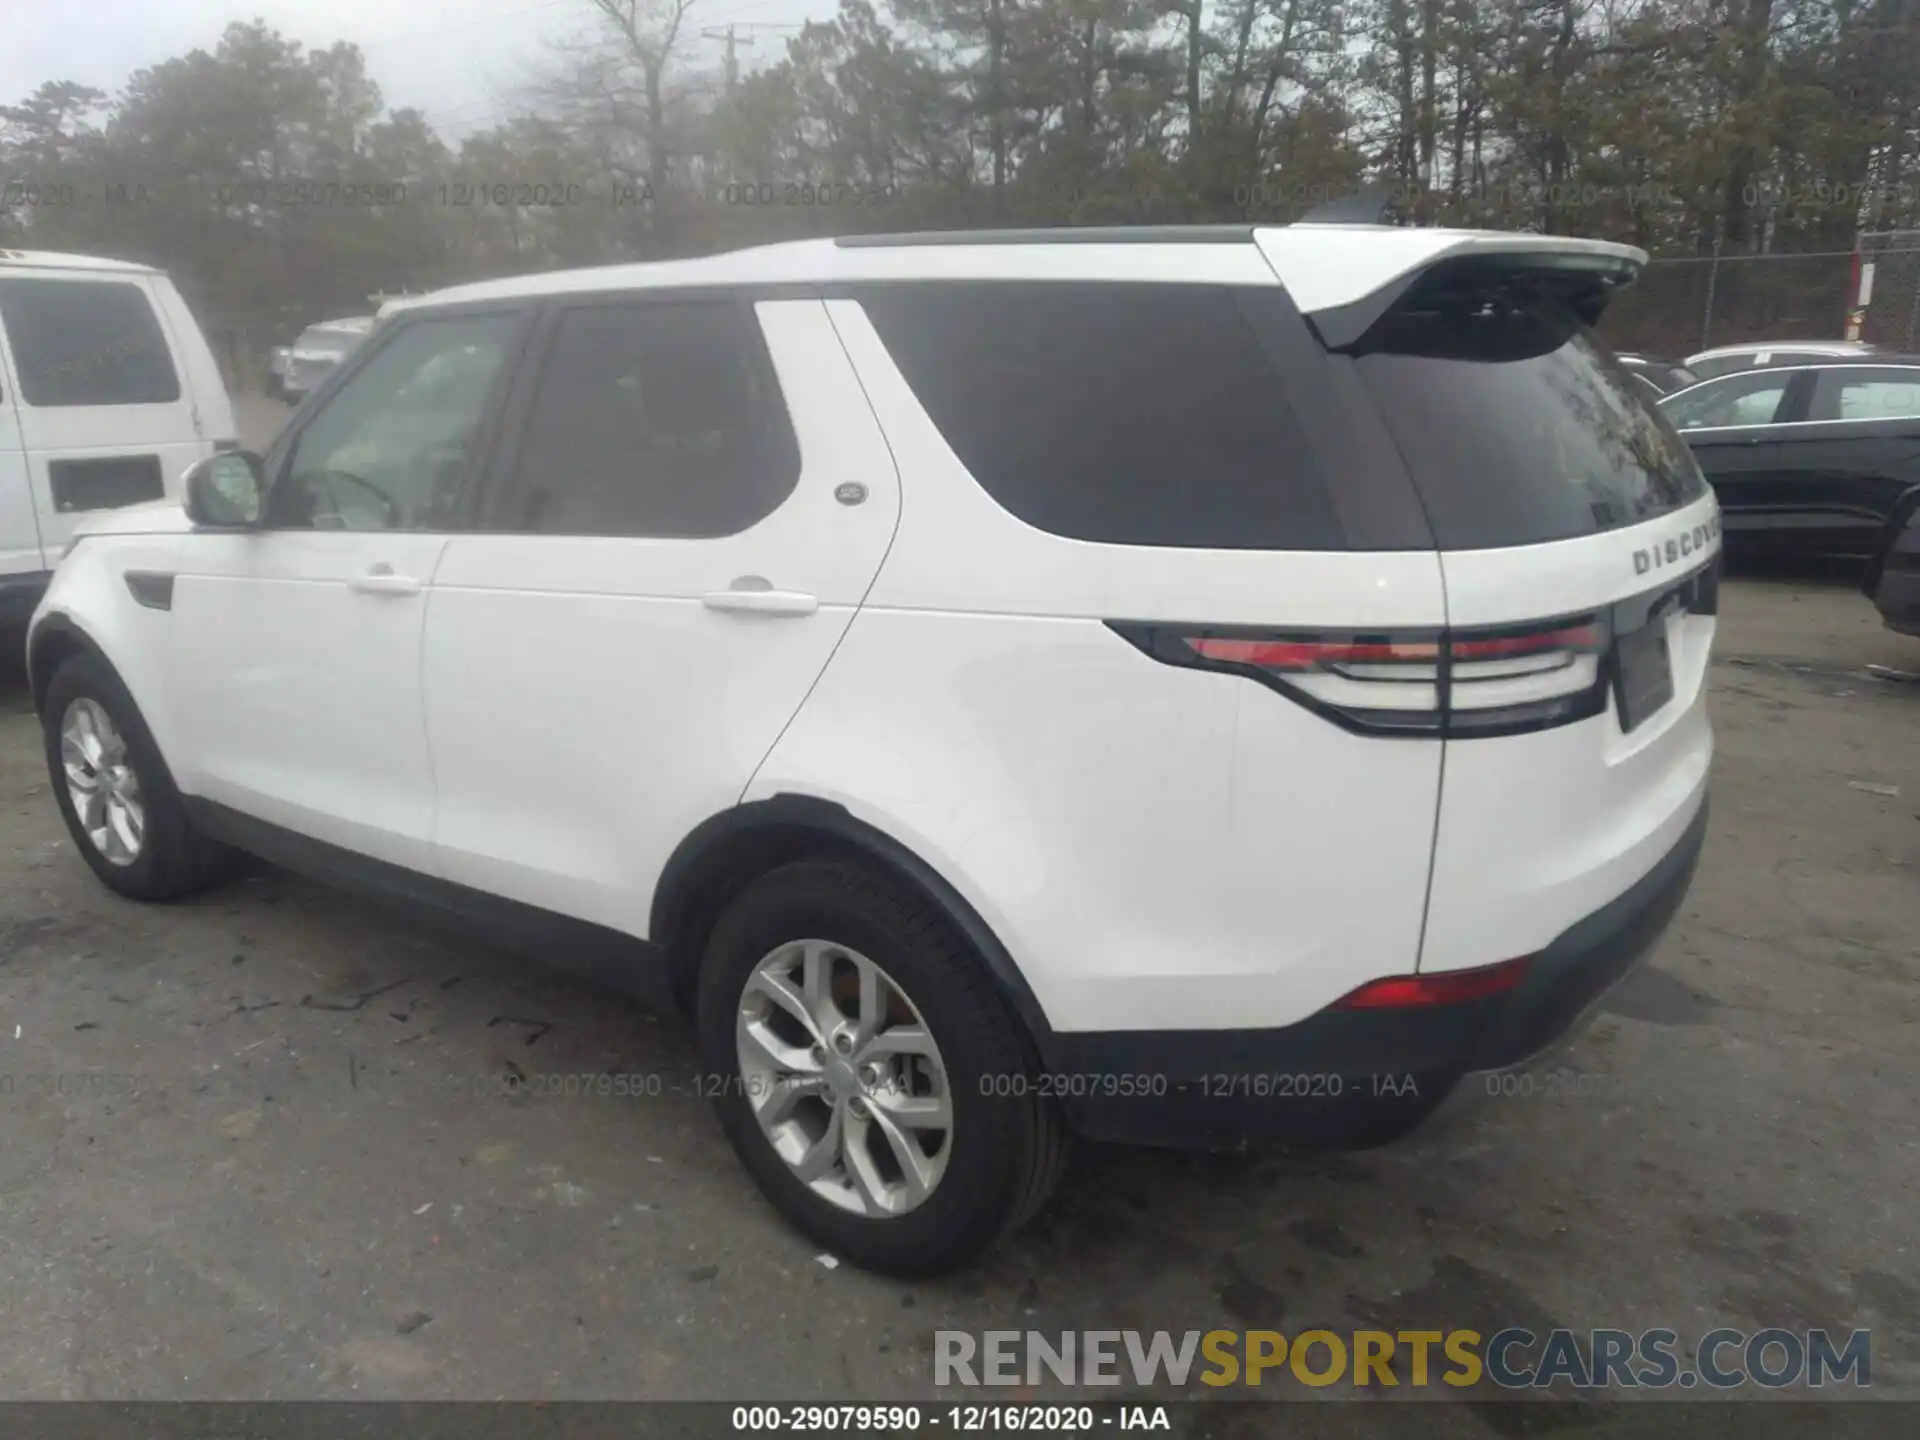 3 Photograph of a damaged car SALRG2RV7L2425164 LAND ROVER DISCOVERY 2020